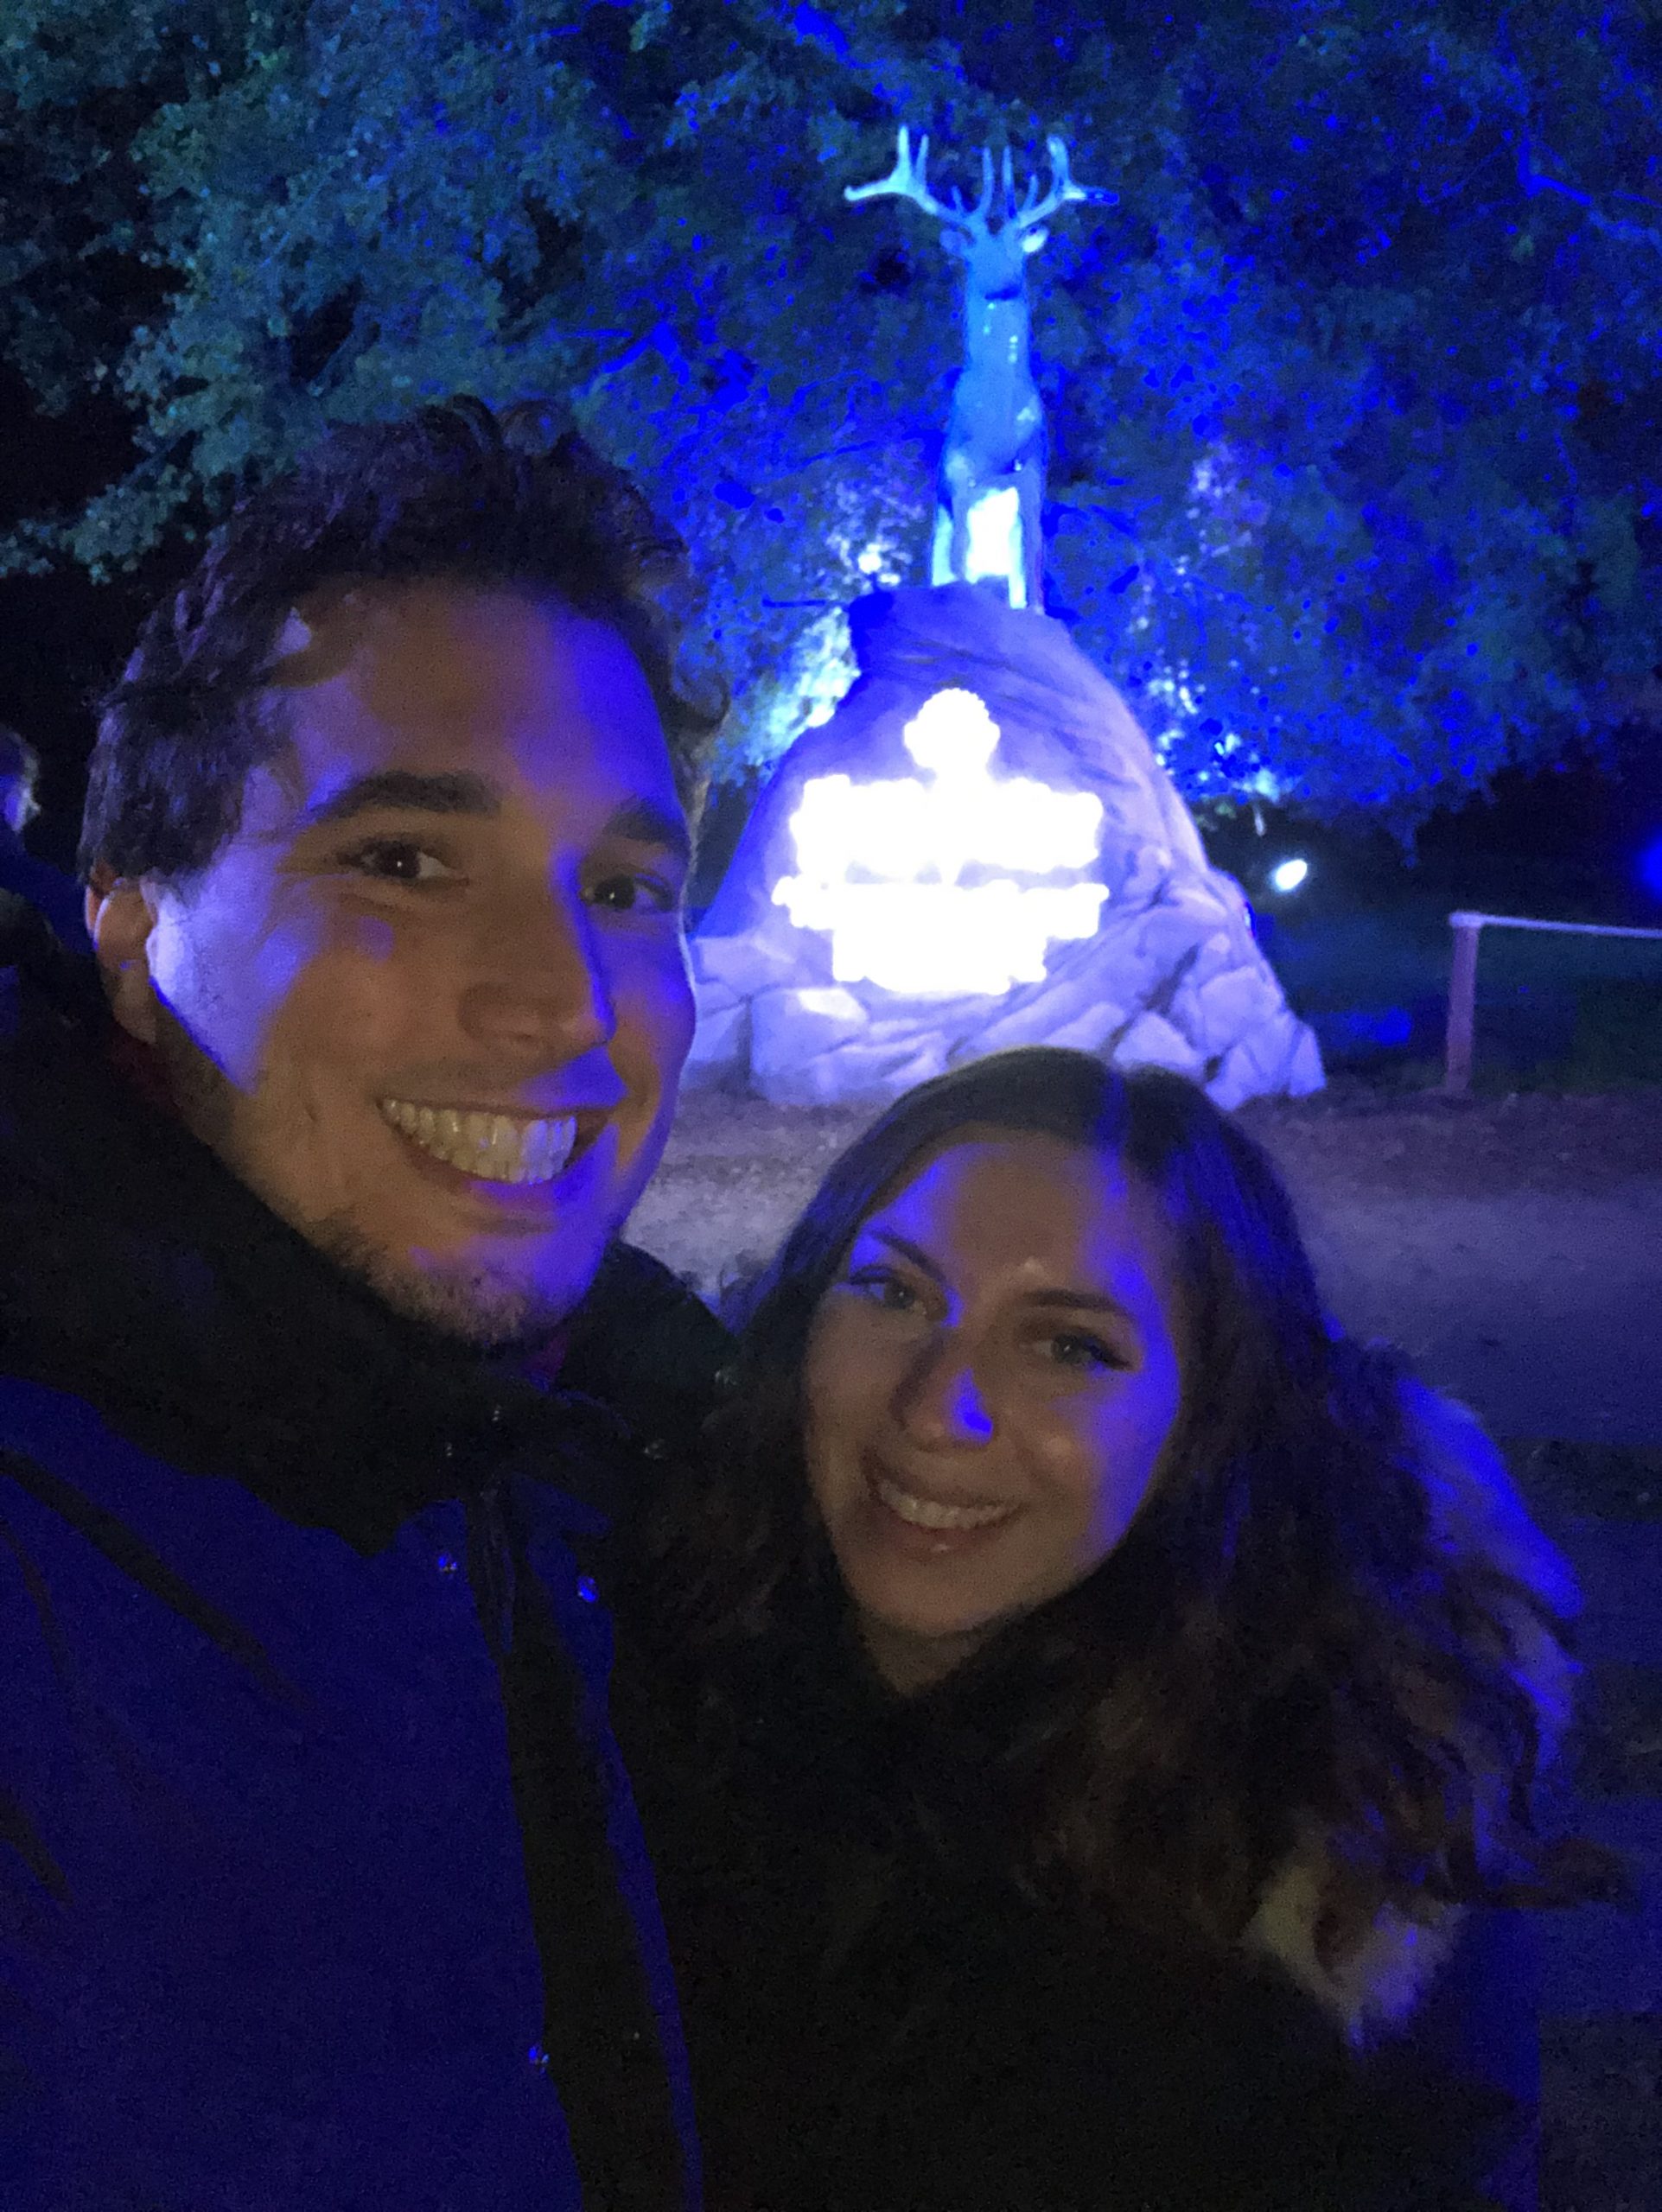 Date night at the Harry Potter forbidden forest experience